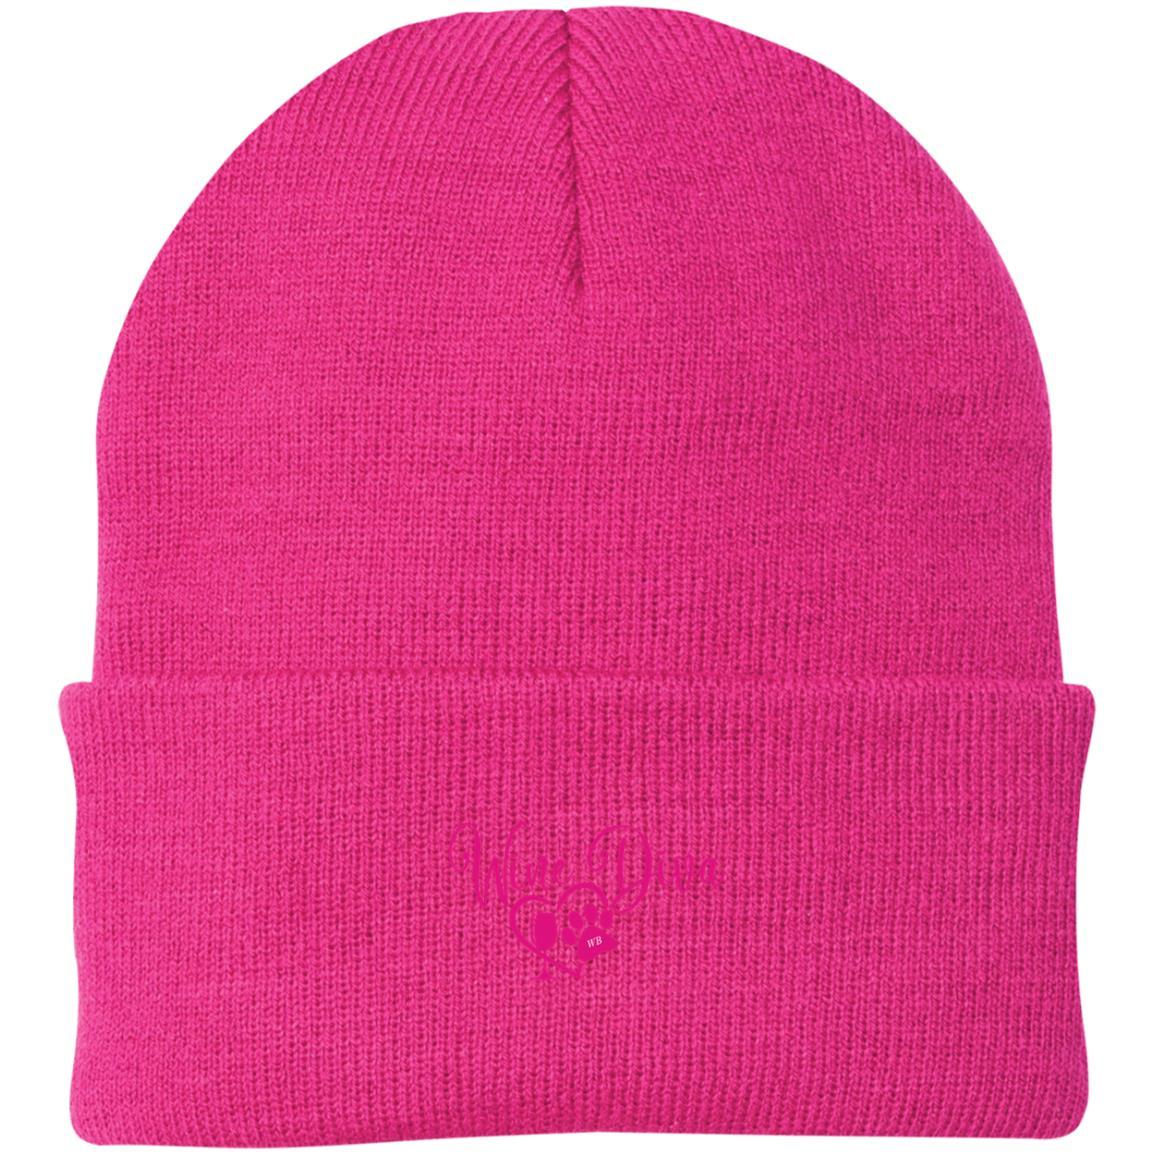 Hats Neon Pink / One Size Winey Bitches Co "Wine Diva" Embroidered Knit Cap WineyBitchesCo